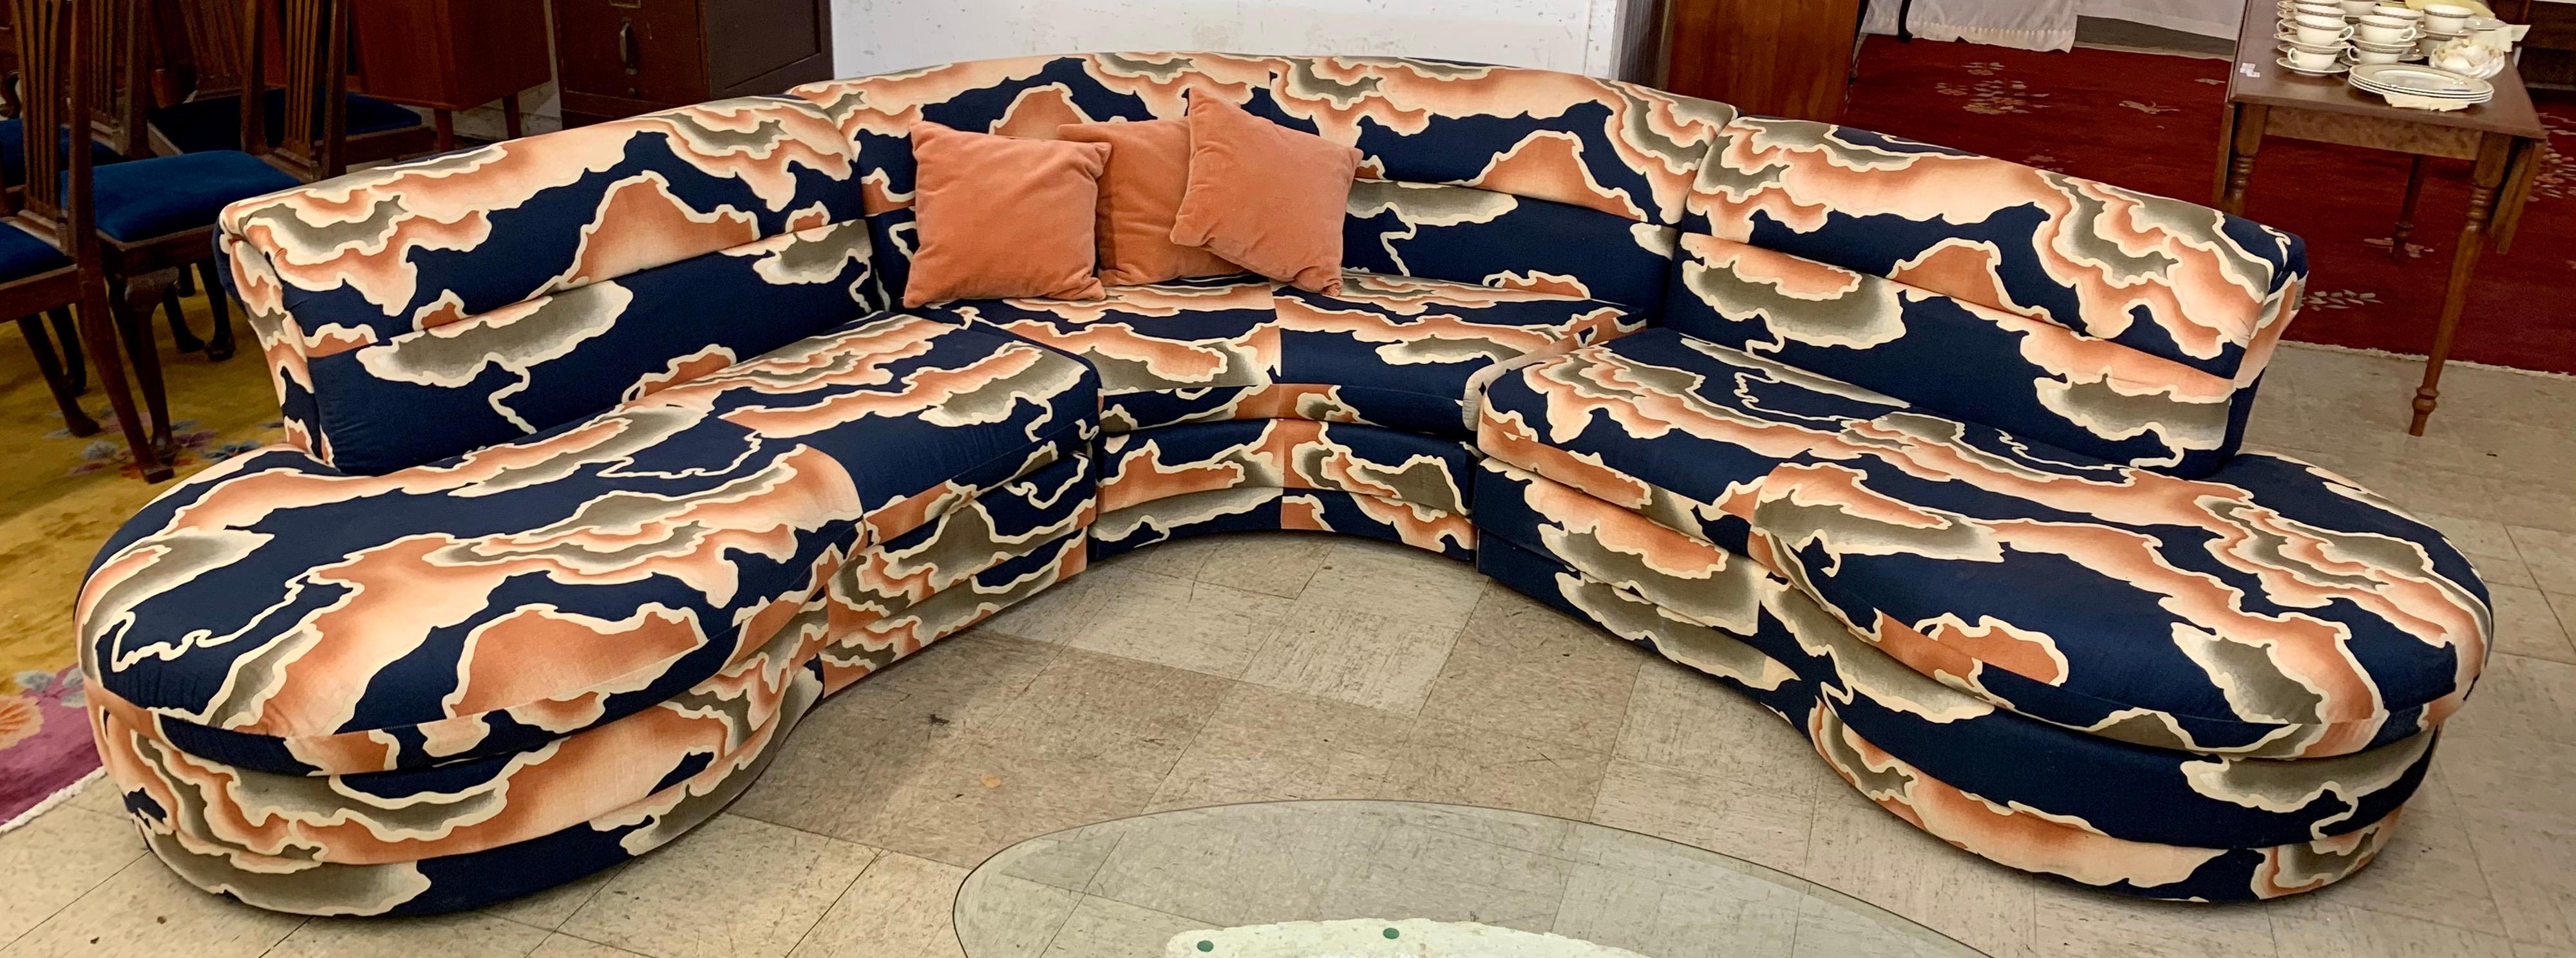 Colorful groovy biomorphic vintage 3 pc curved sectional sofa upholstered in a navy, orange and olive green print fabric. Original fabric in excellent condition. Super comfortable.

Left piece measures 57 inches wide x 39 inches deep x